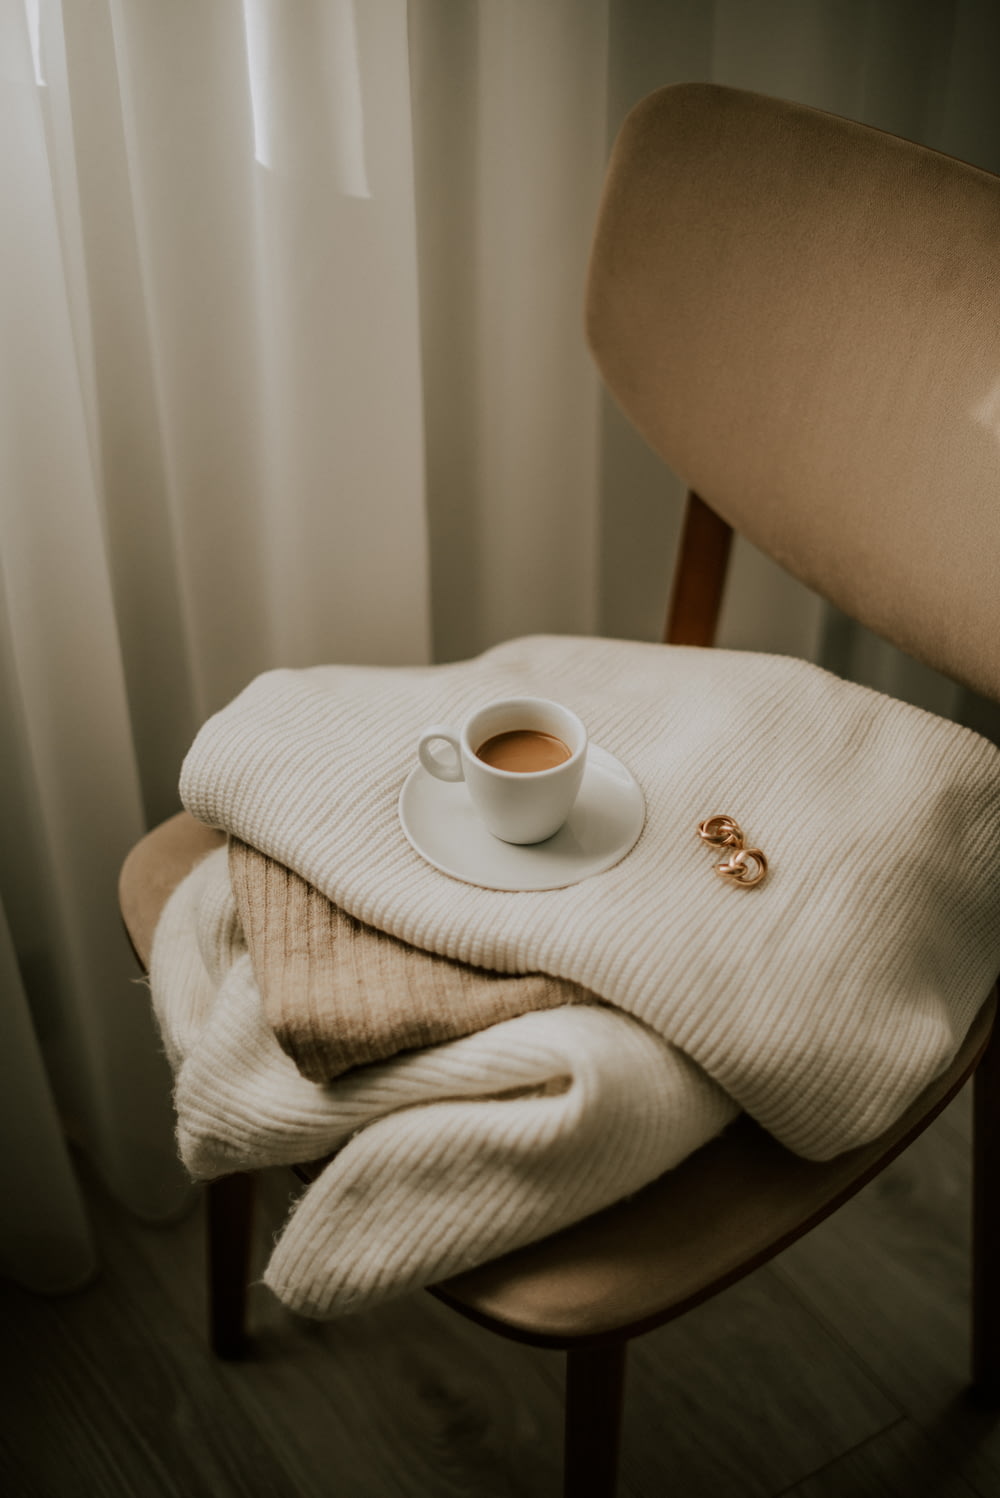 a cup of coffee sits on a blanket on a chair